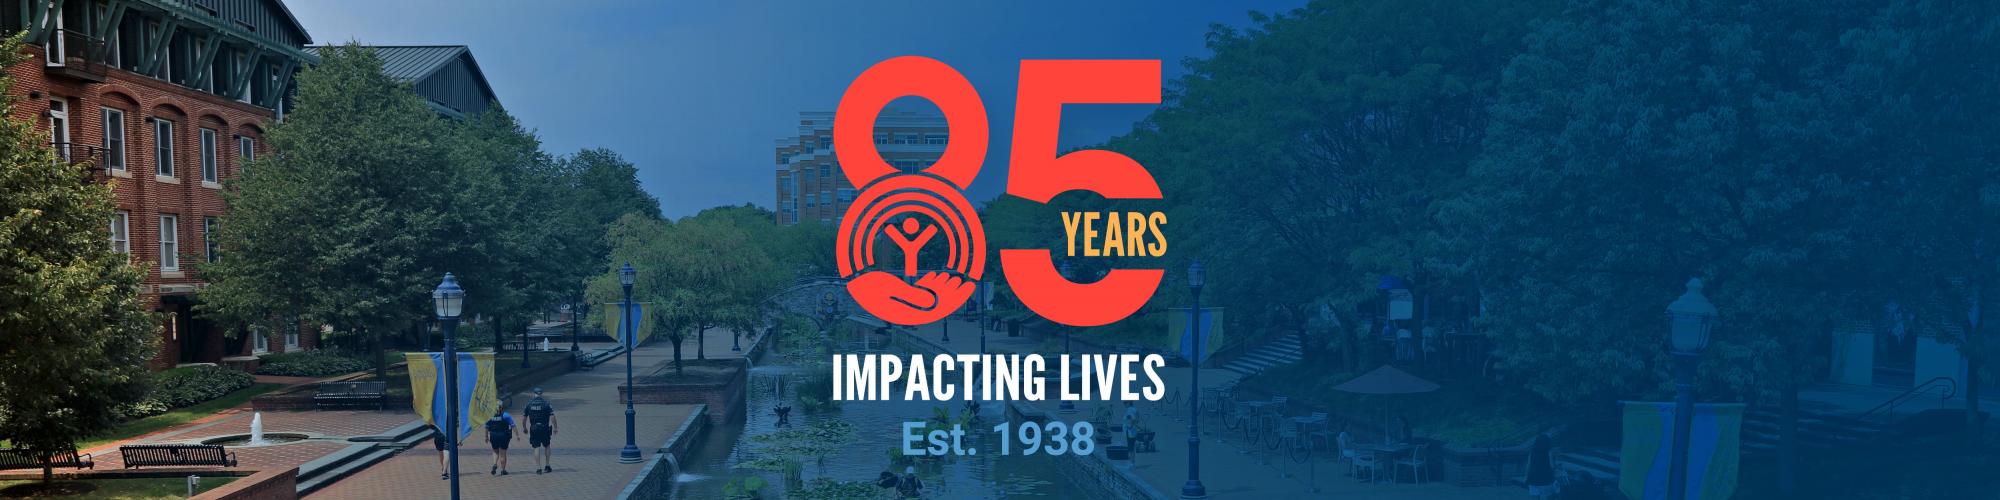 85 Years Impacting Lives